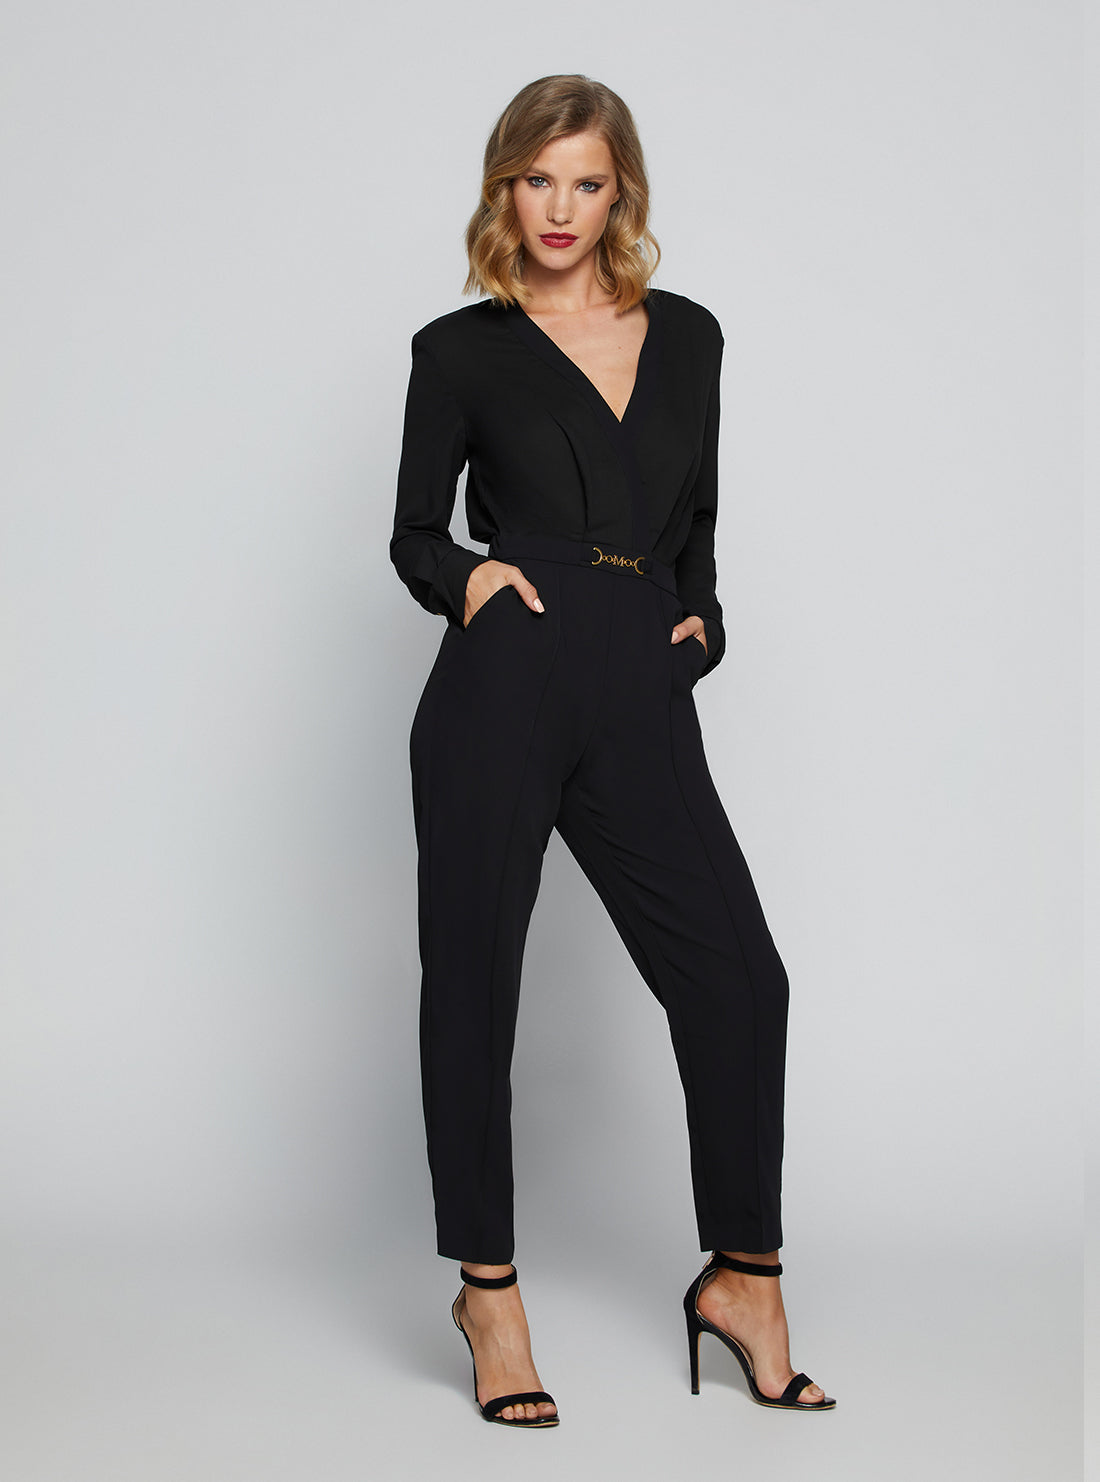 GUESS Women's Marciano Black Lillibeth Jumpsuit 2BGK229630Z Front View